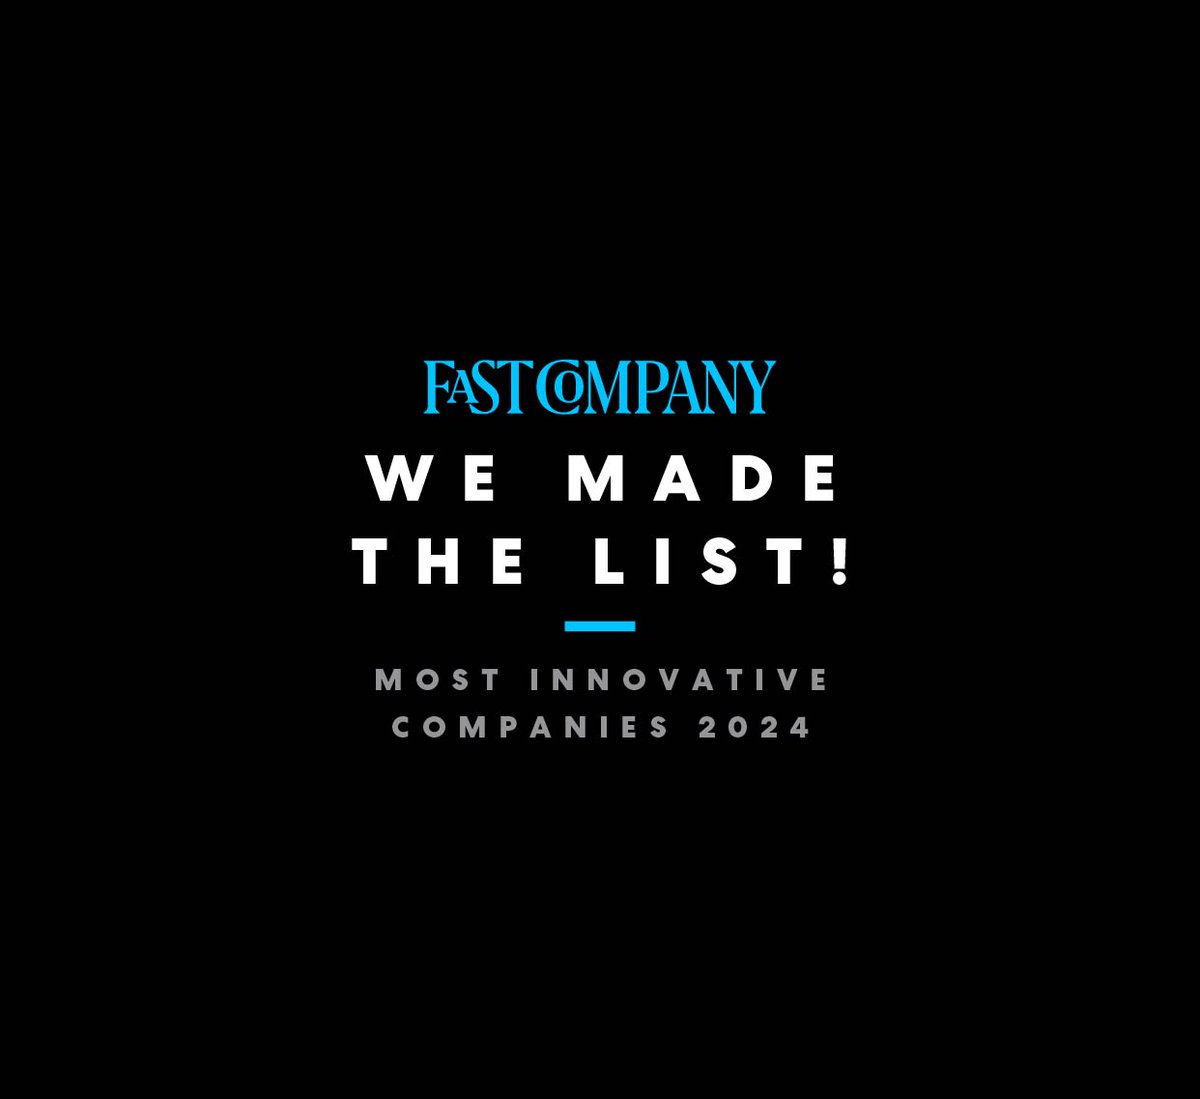 Happy to share Warp made Fast Company’s Most Innovative Companies for 2024 in the Enterprise category. Our focus has been bringing innovation to the terminal so engineering teams can deliver great software quickly and reliably. Thank you, @FastCompany, for the recognition!